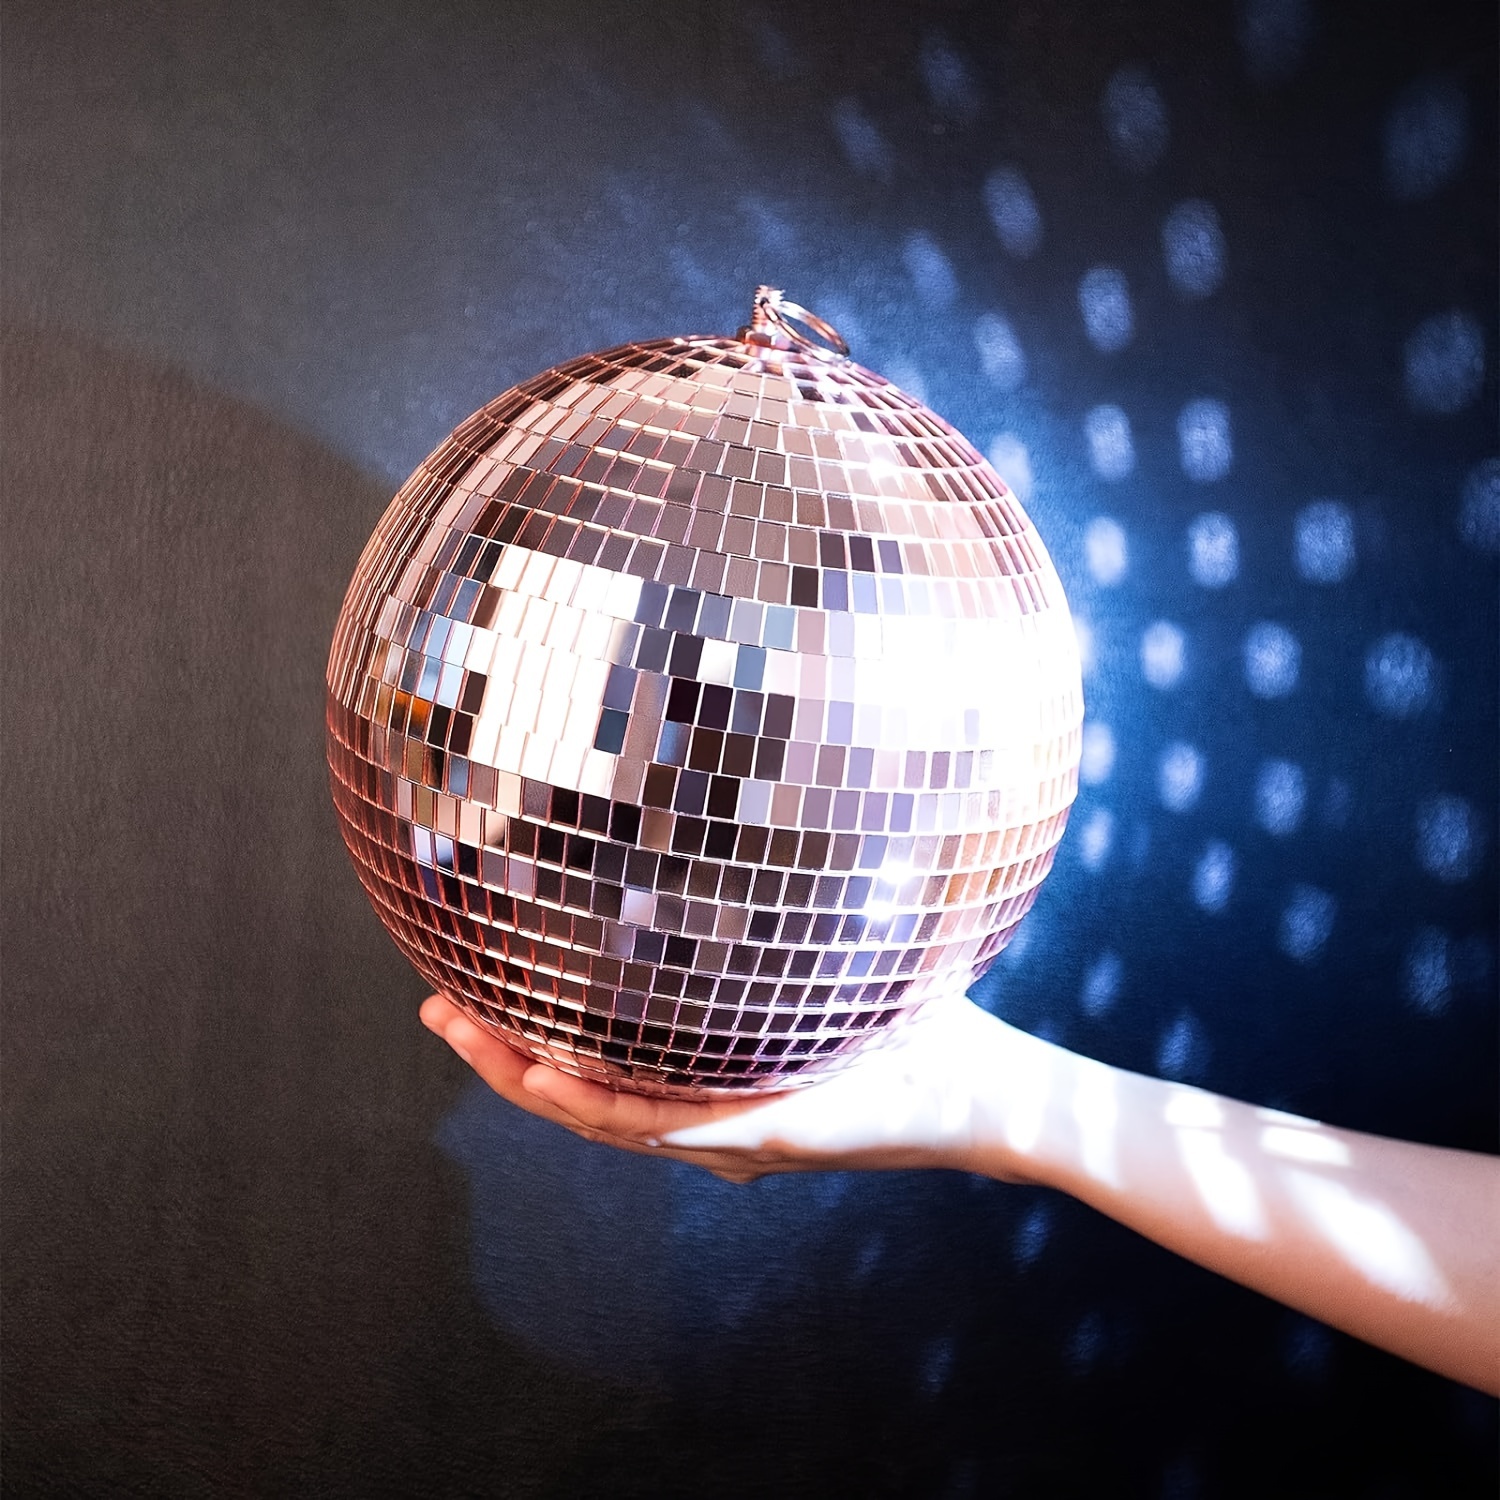 6 INCH DISCO PARTY LIGHT